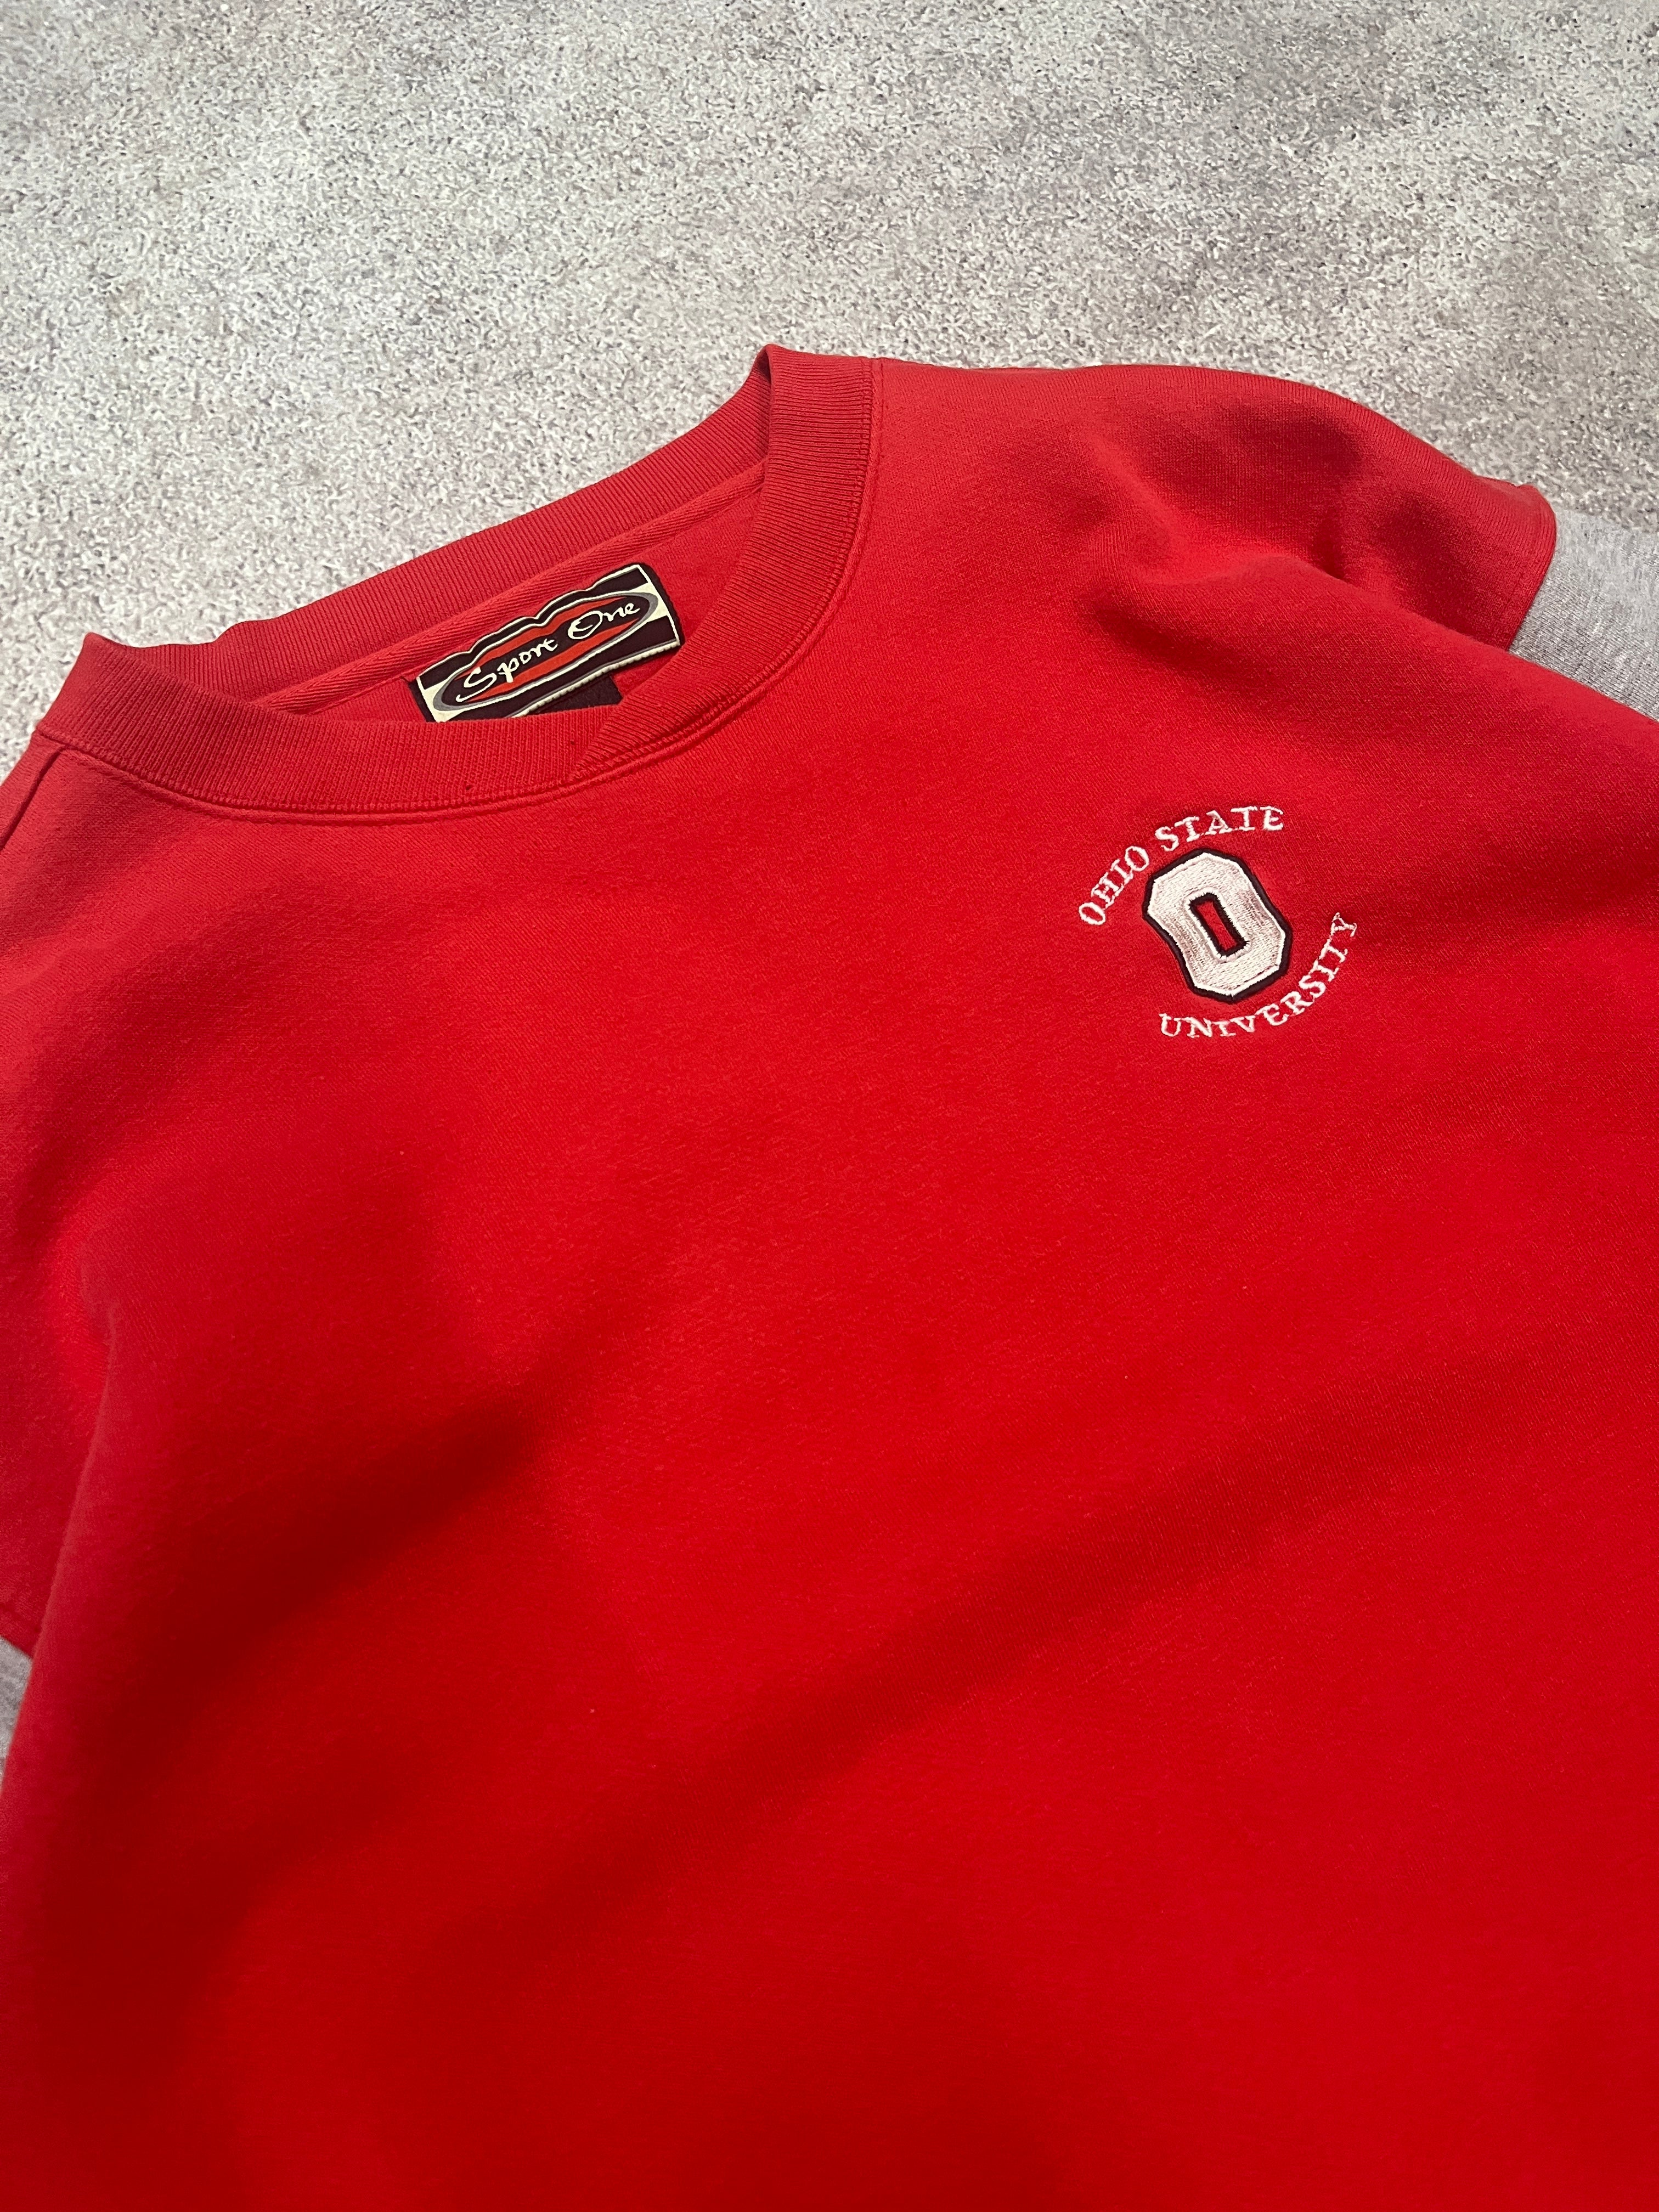 Vintage Ohio State Sweater Red // Large - RHAGHOUSE VINTAGE